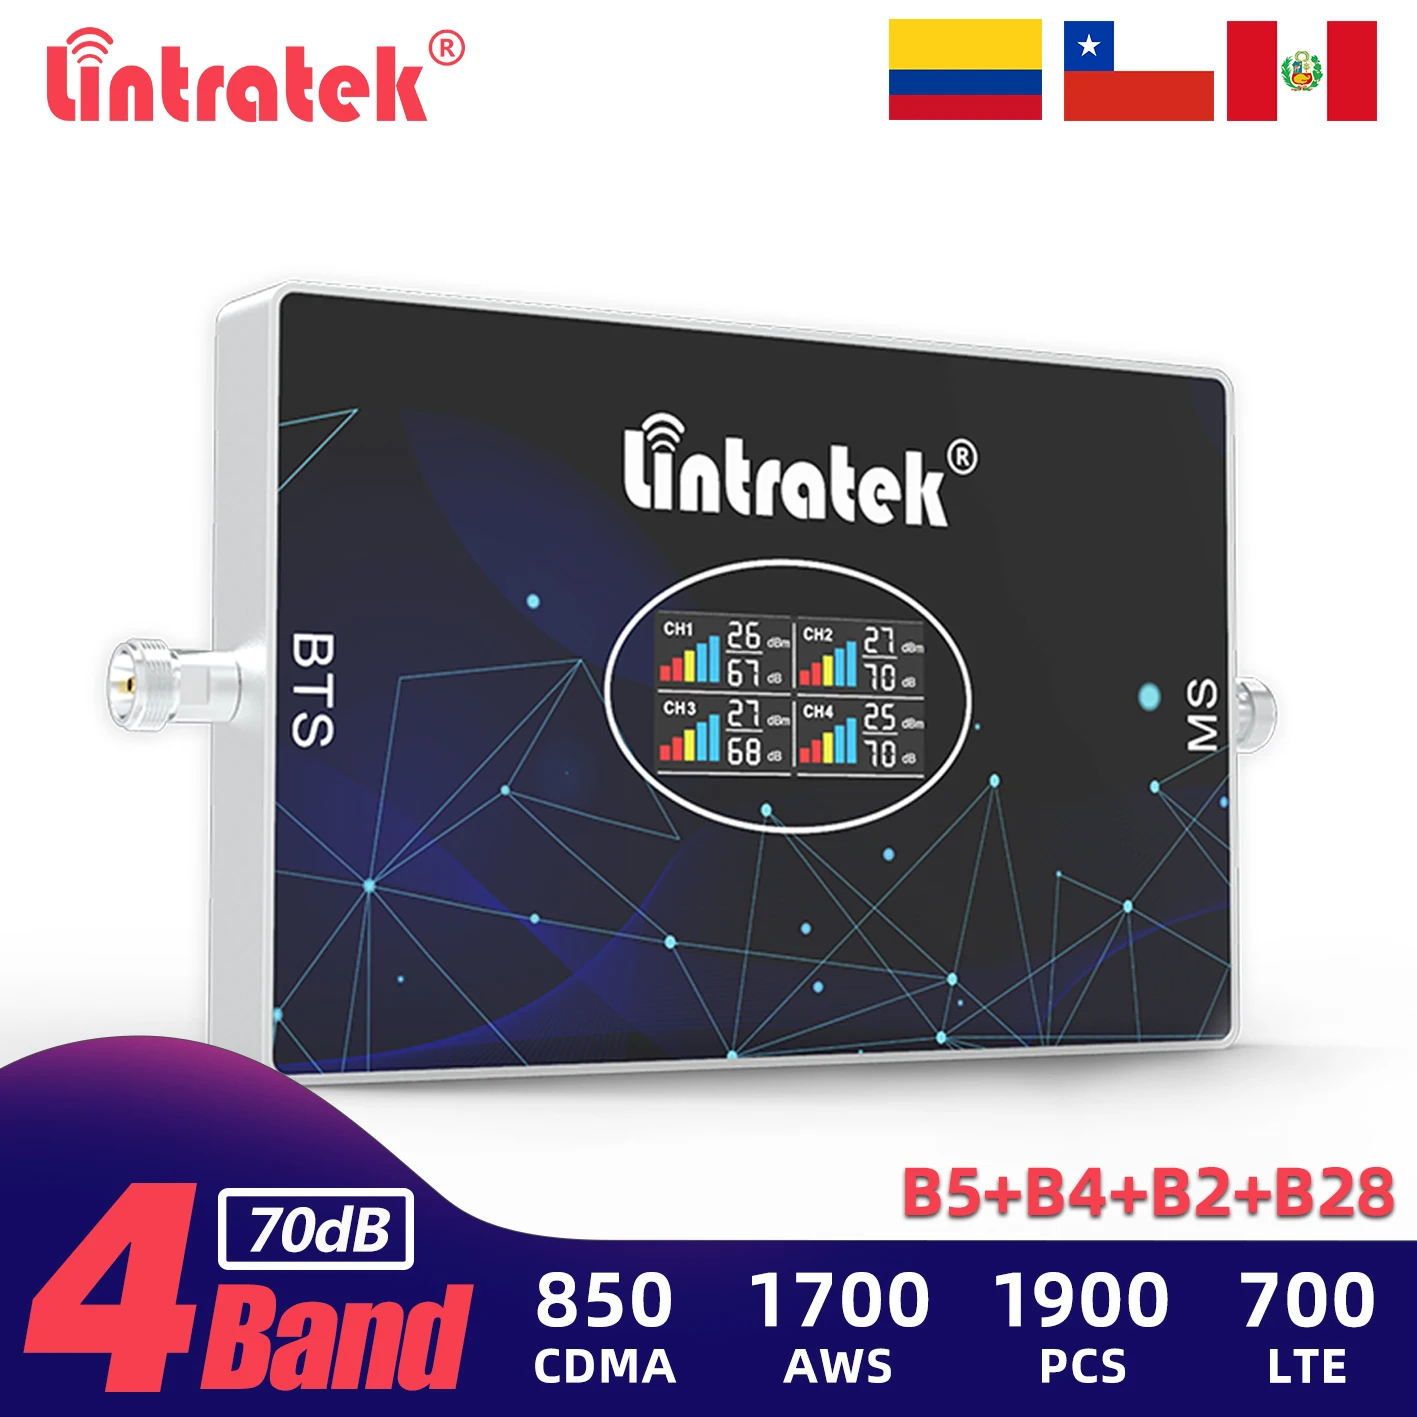 Lintratek Four-Band Signal Repeater 850 700 1900 1700 Band 28 Cellular Booster 2G GSM 3G 4G LTE Cell Phone Network Amplifier fm japan samsung wide angle band 11m perimeter 1250 1280 1320 1360 1400 1450 1500 1550 1600 1650 1700 1750 1800 1850 1900 2300mm